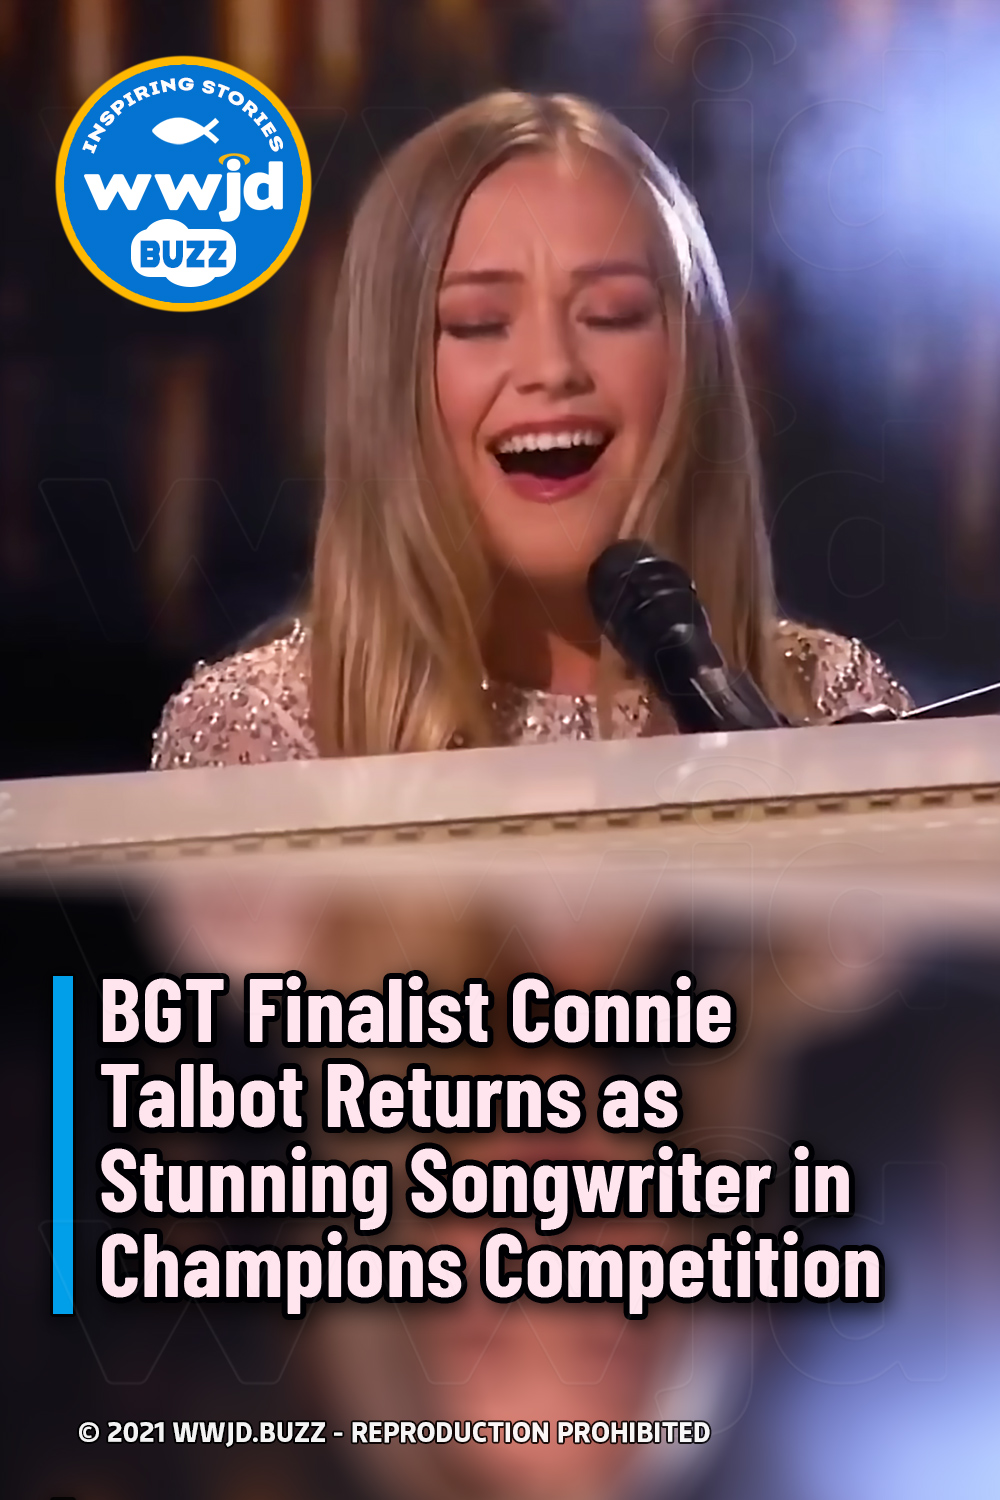 BGT Finalist Connie Talbot Returns as Stunning Songwriter in Champions Competition